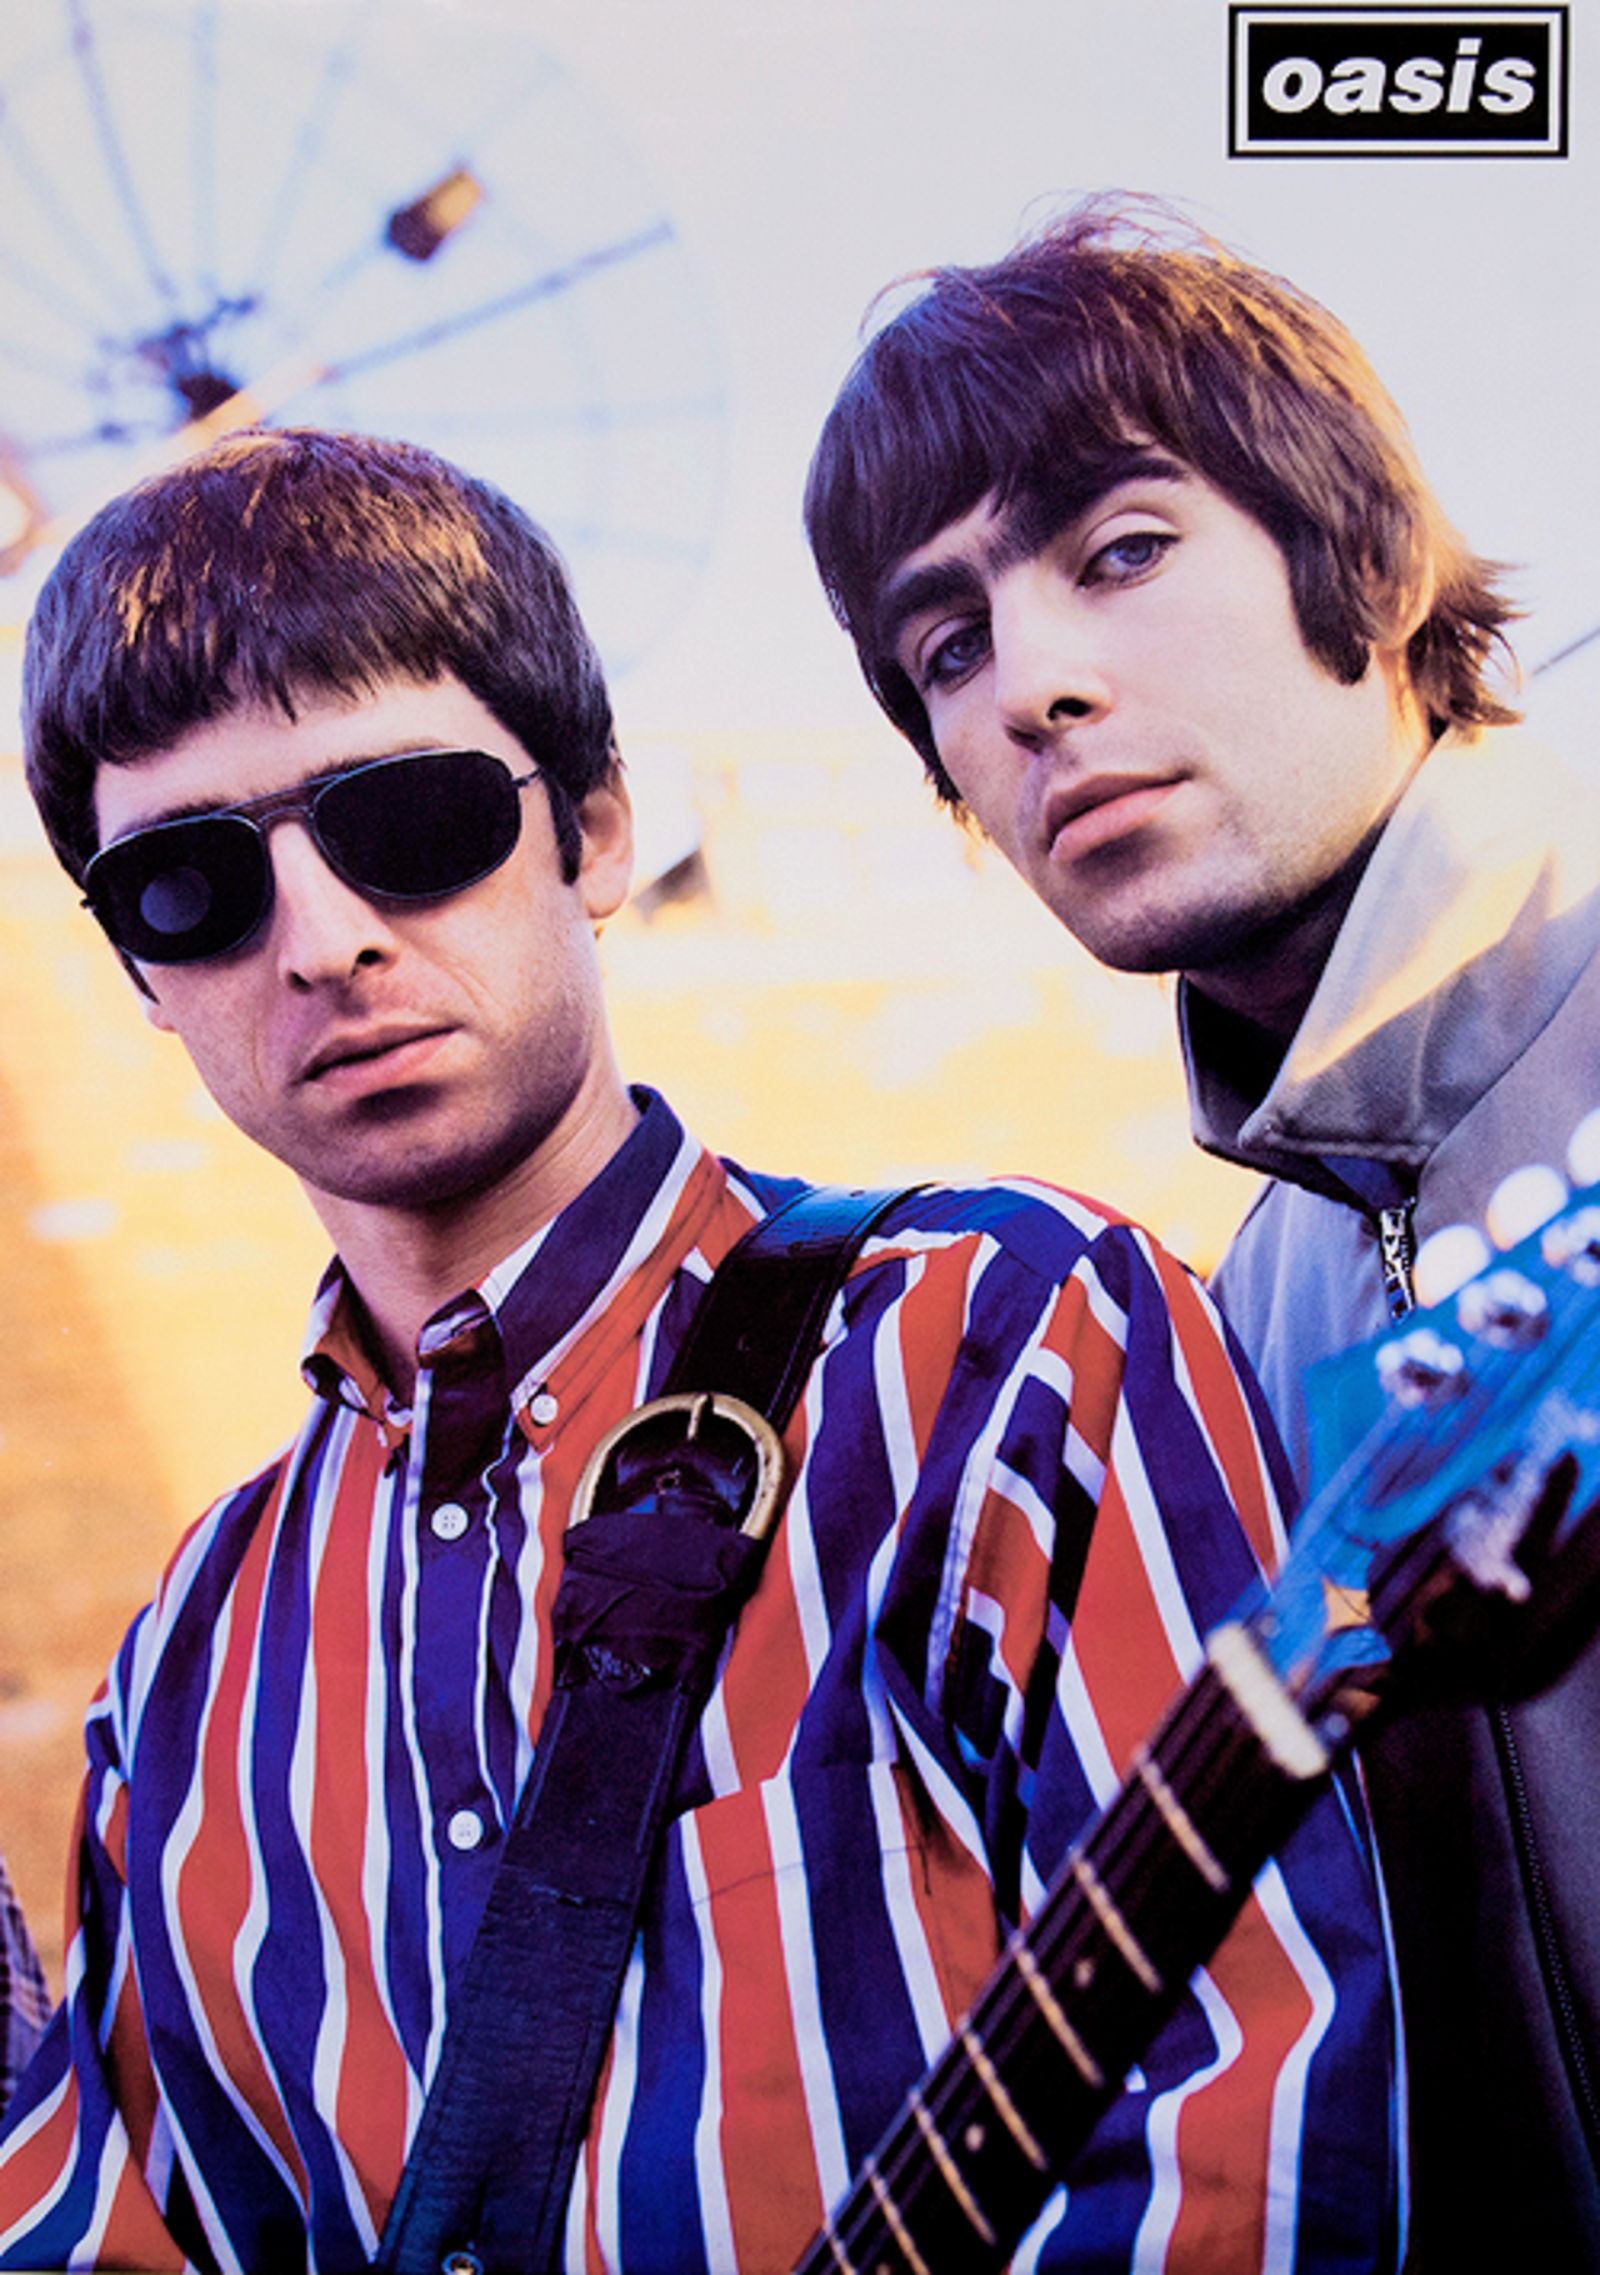 oasis-20190911-133148-001.png